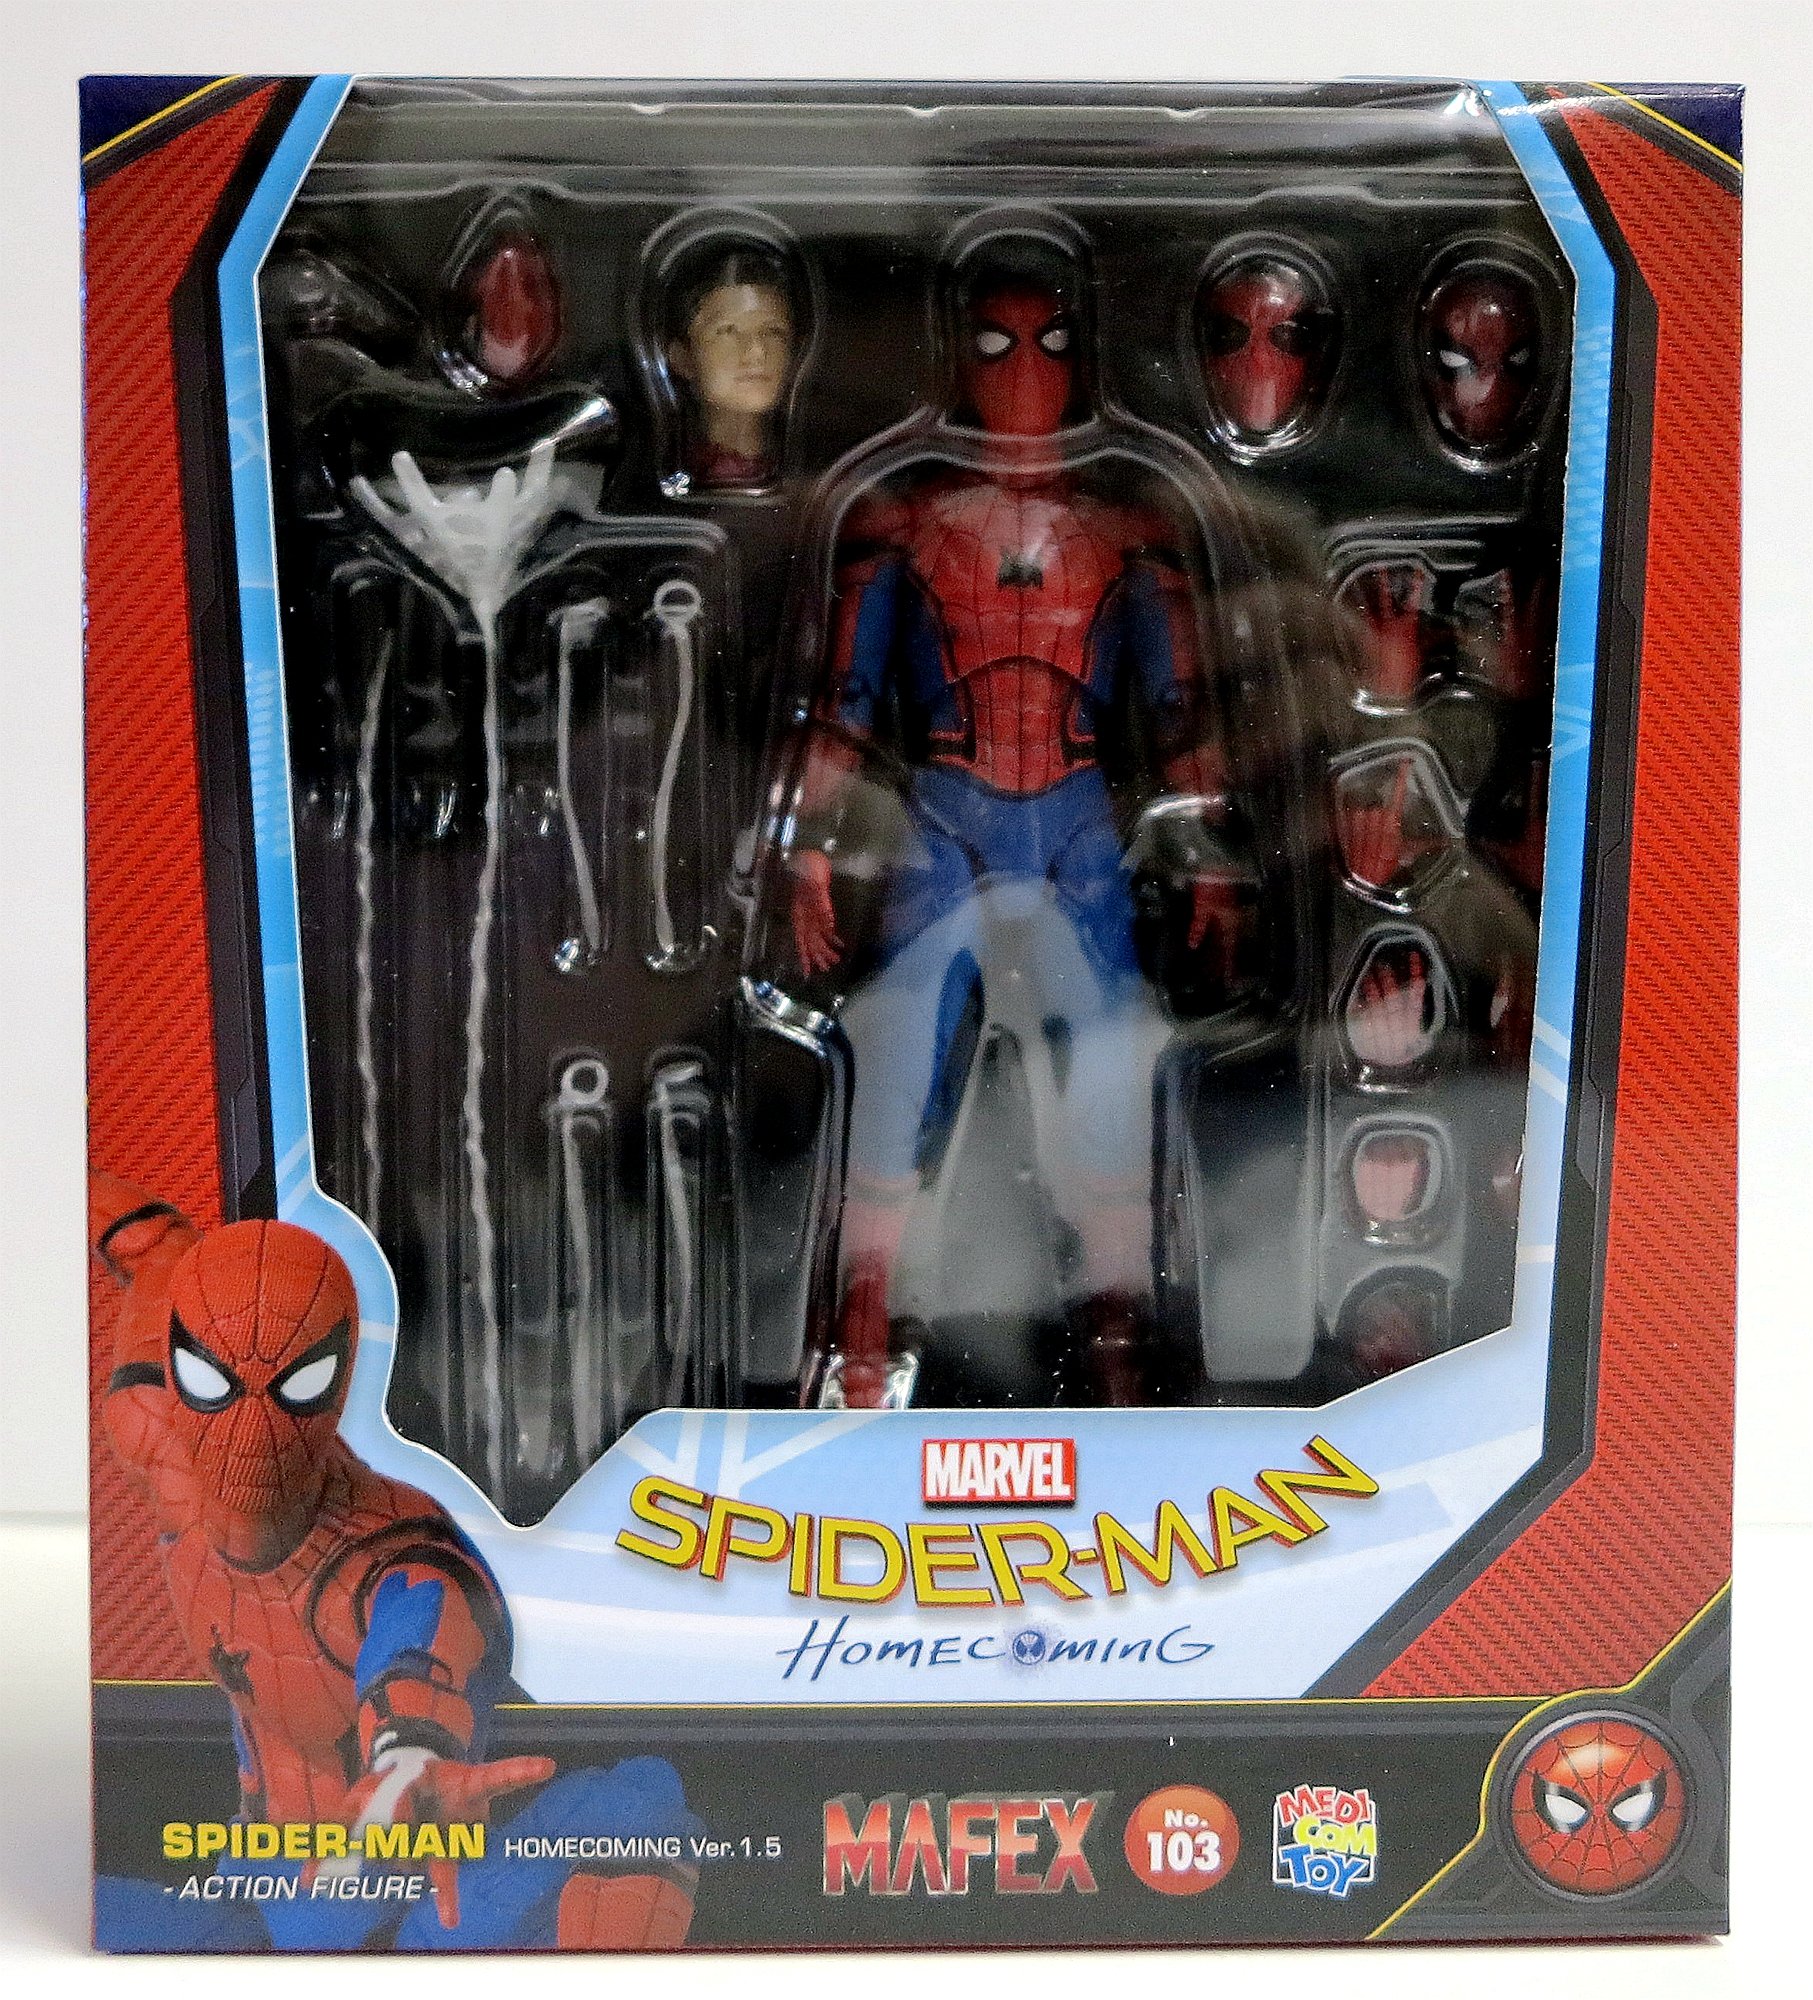 MAFEX Spiderman Spider-Man Homecoming 